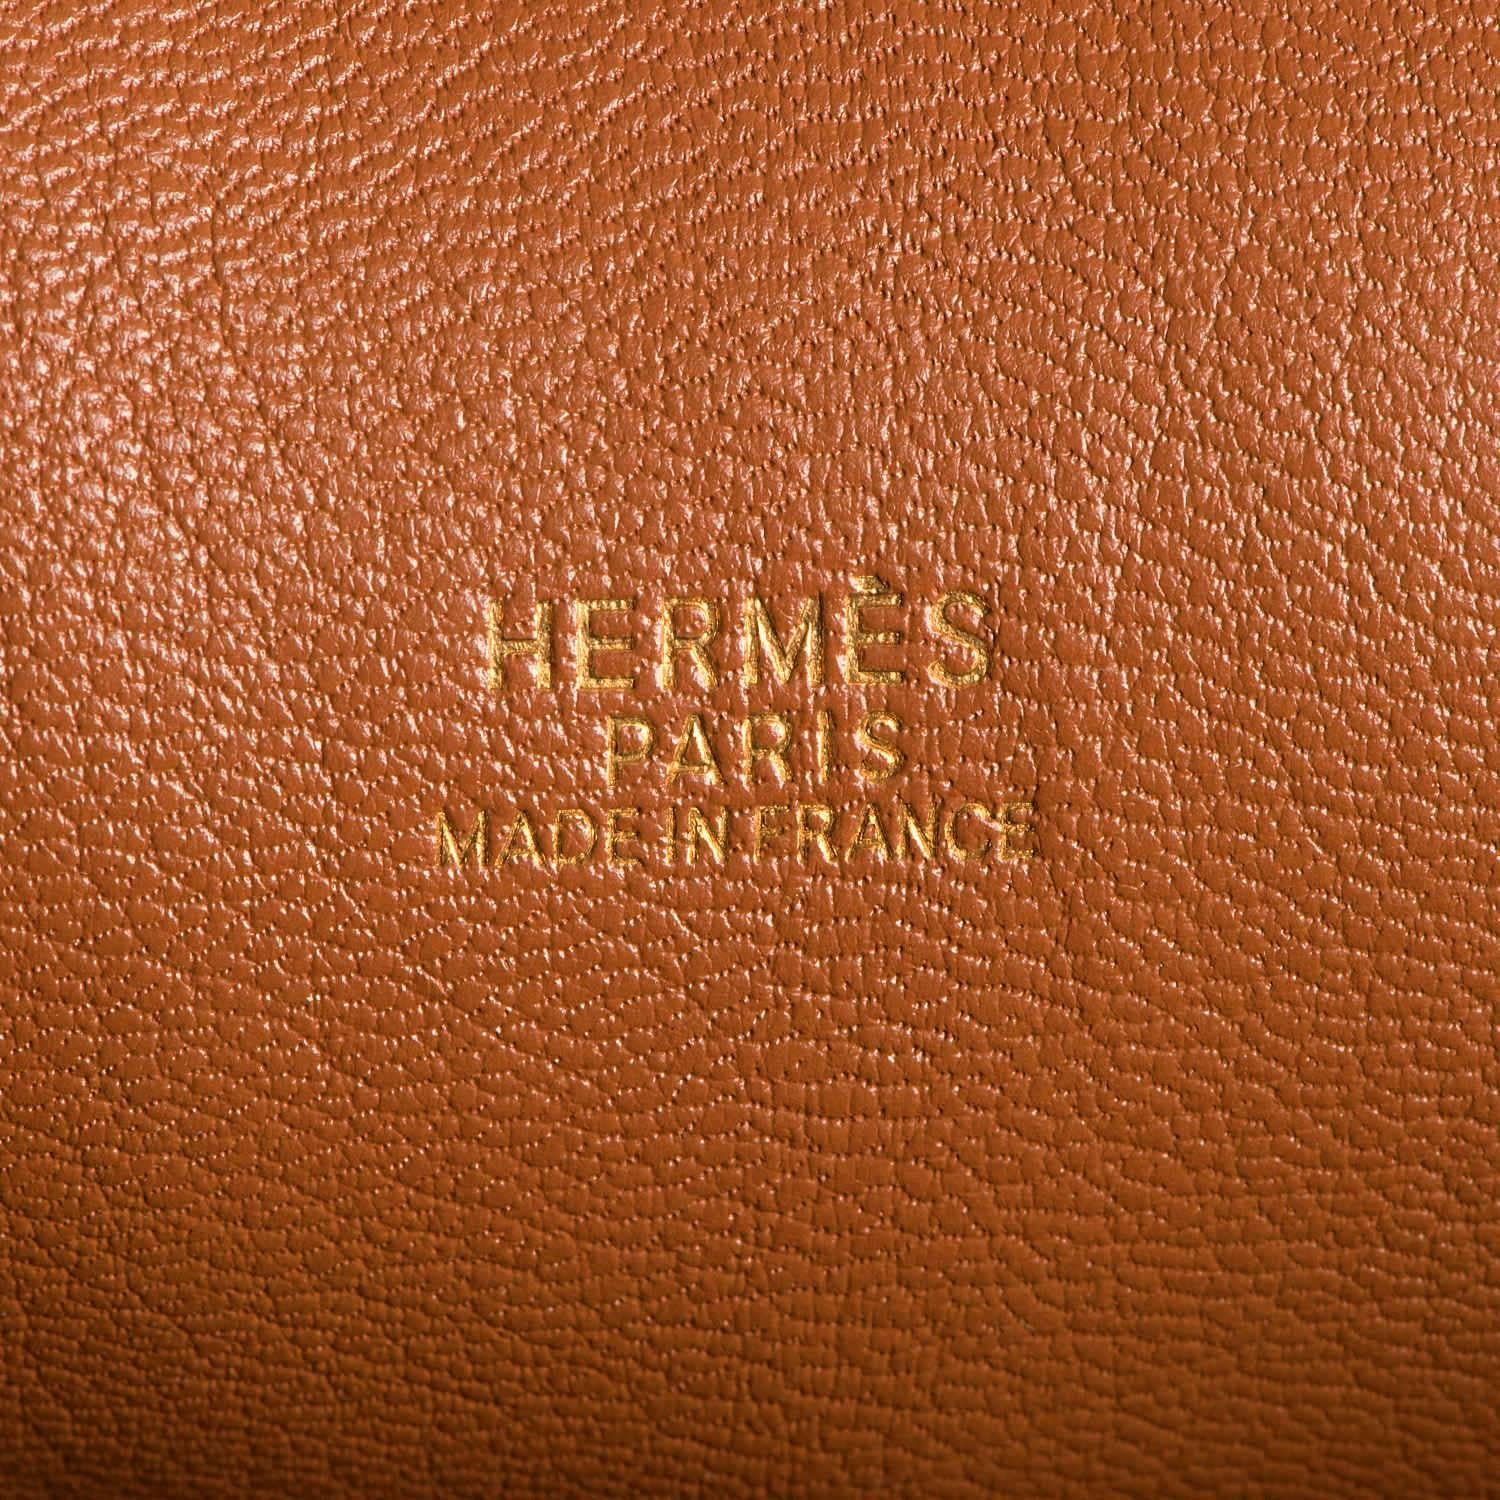 A RARE FIND Pristine Hermes Kelly Sport in Sable Togo Leather & Gold HW          4